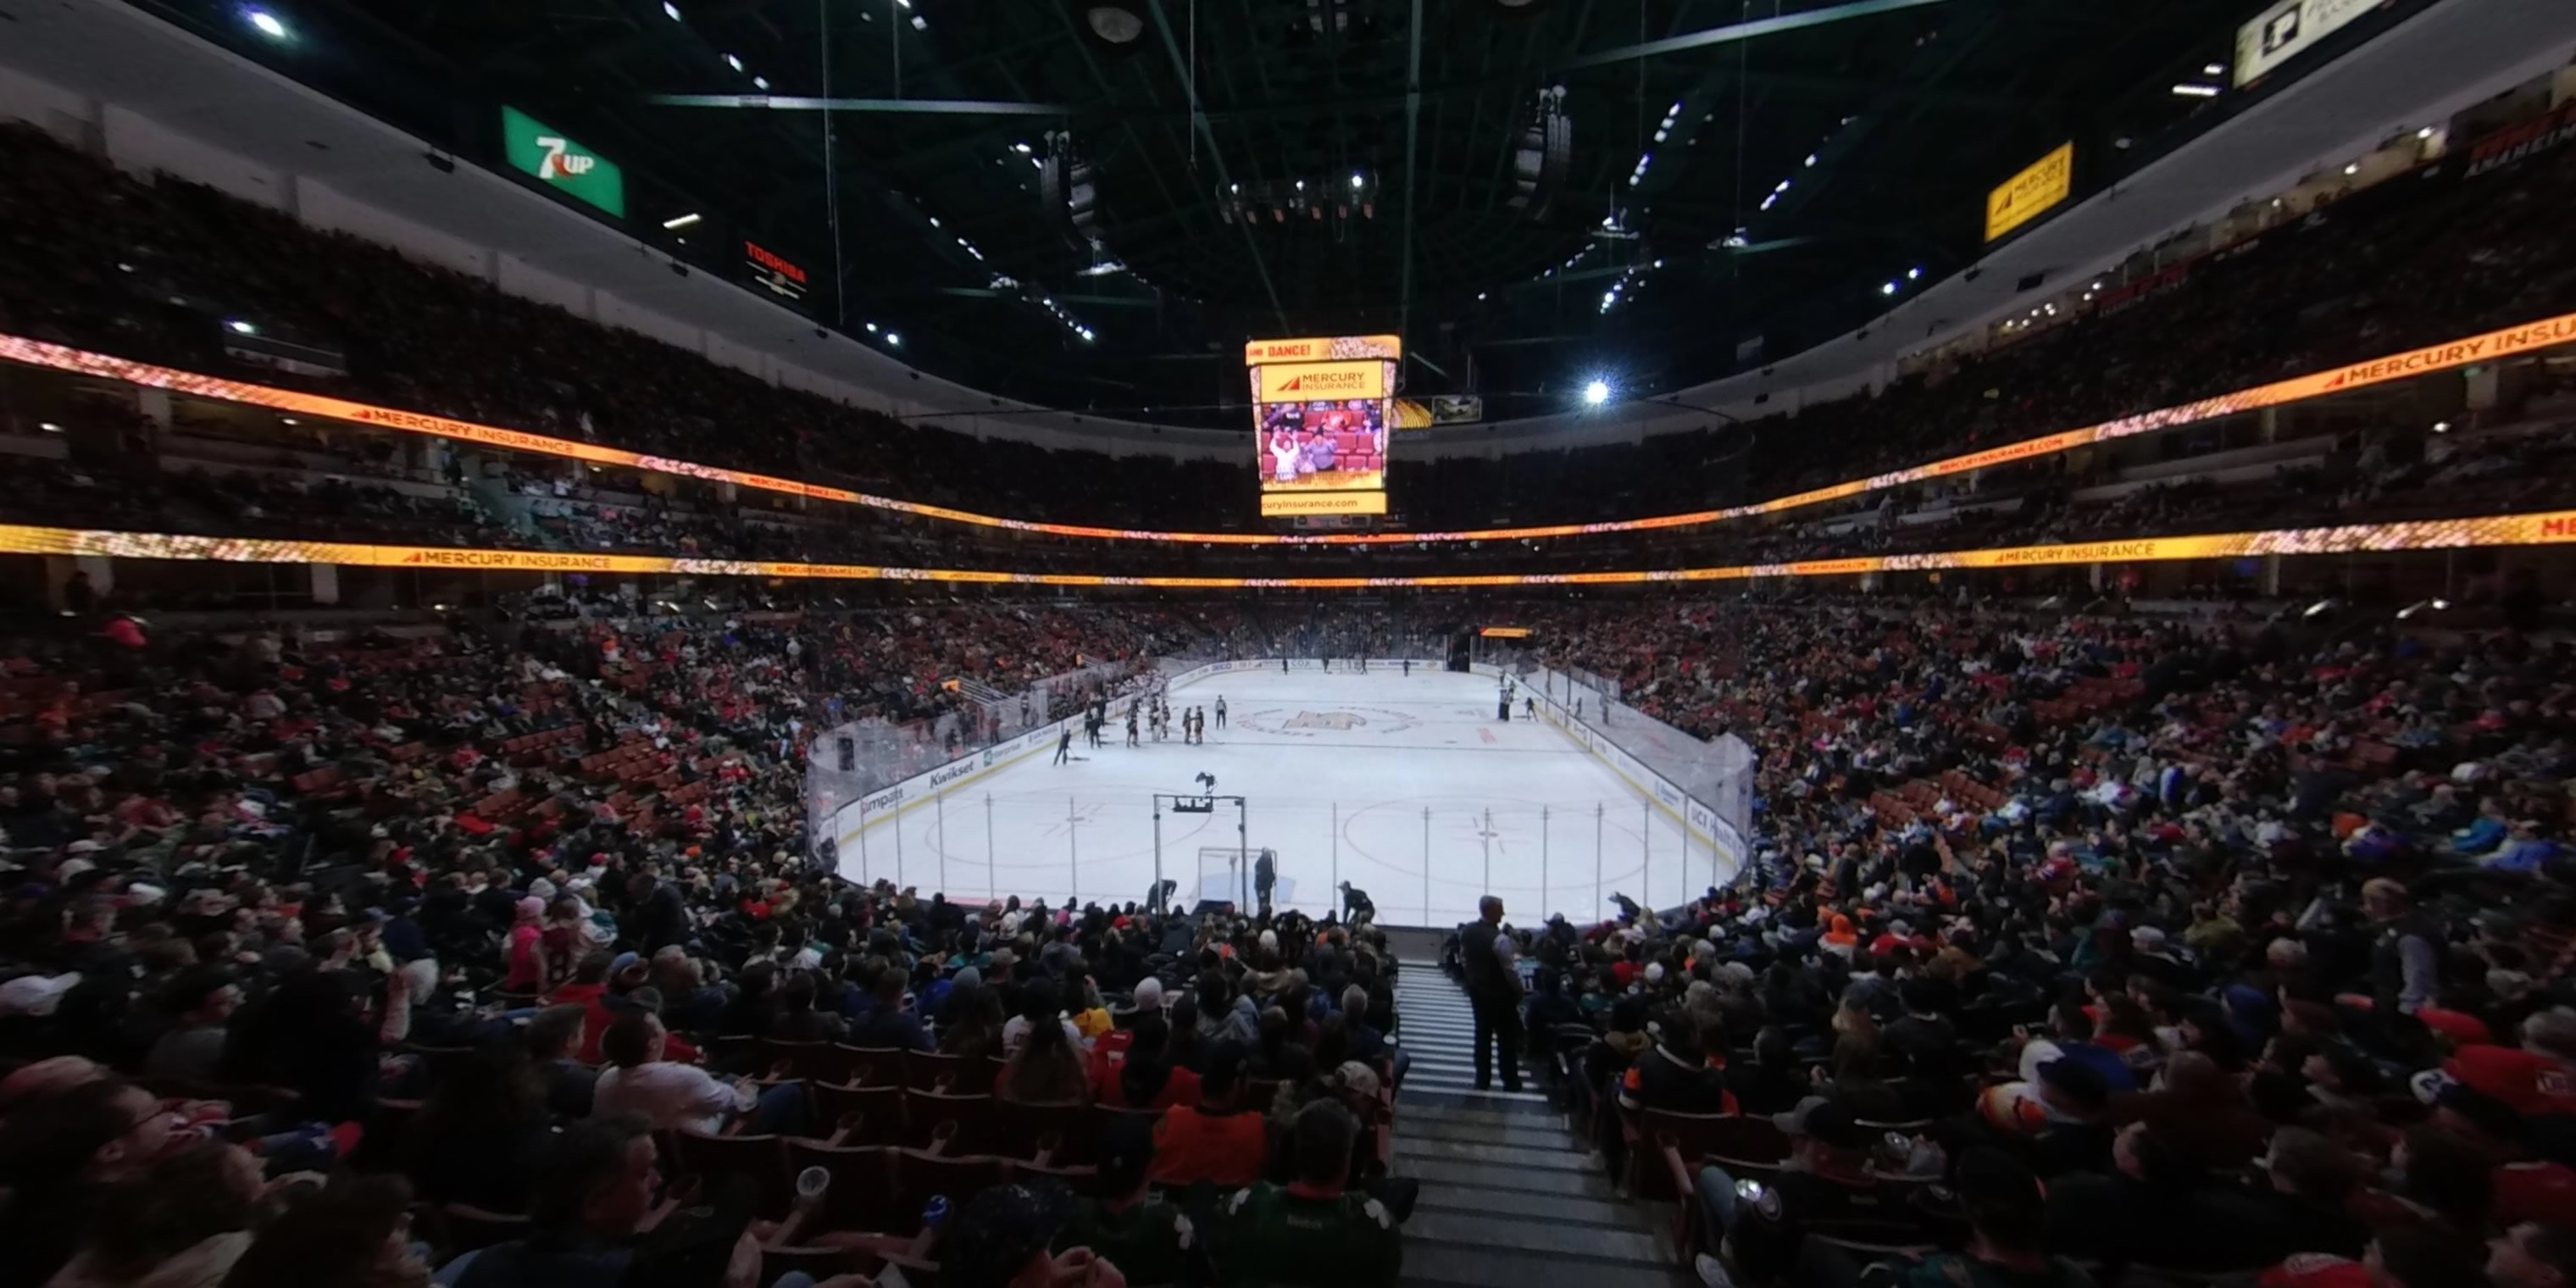 section 228 panoramic seat view  for hockey - honda center